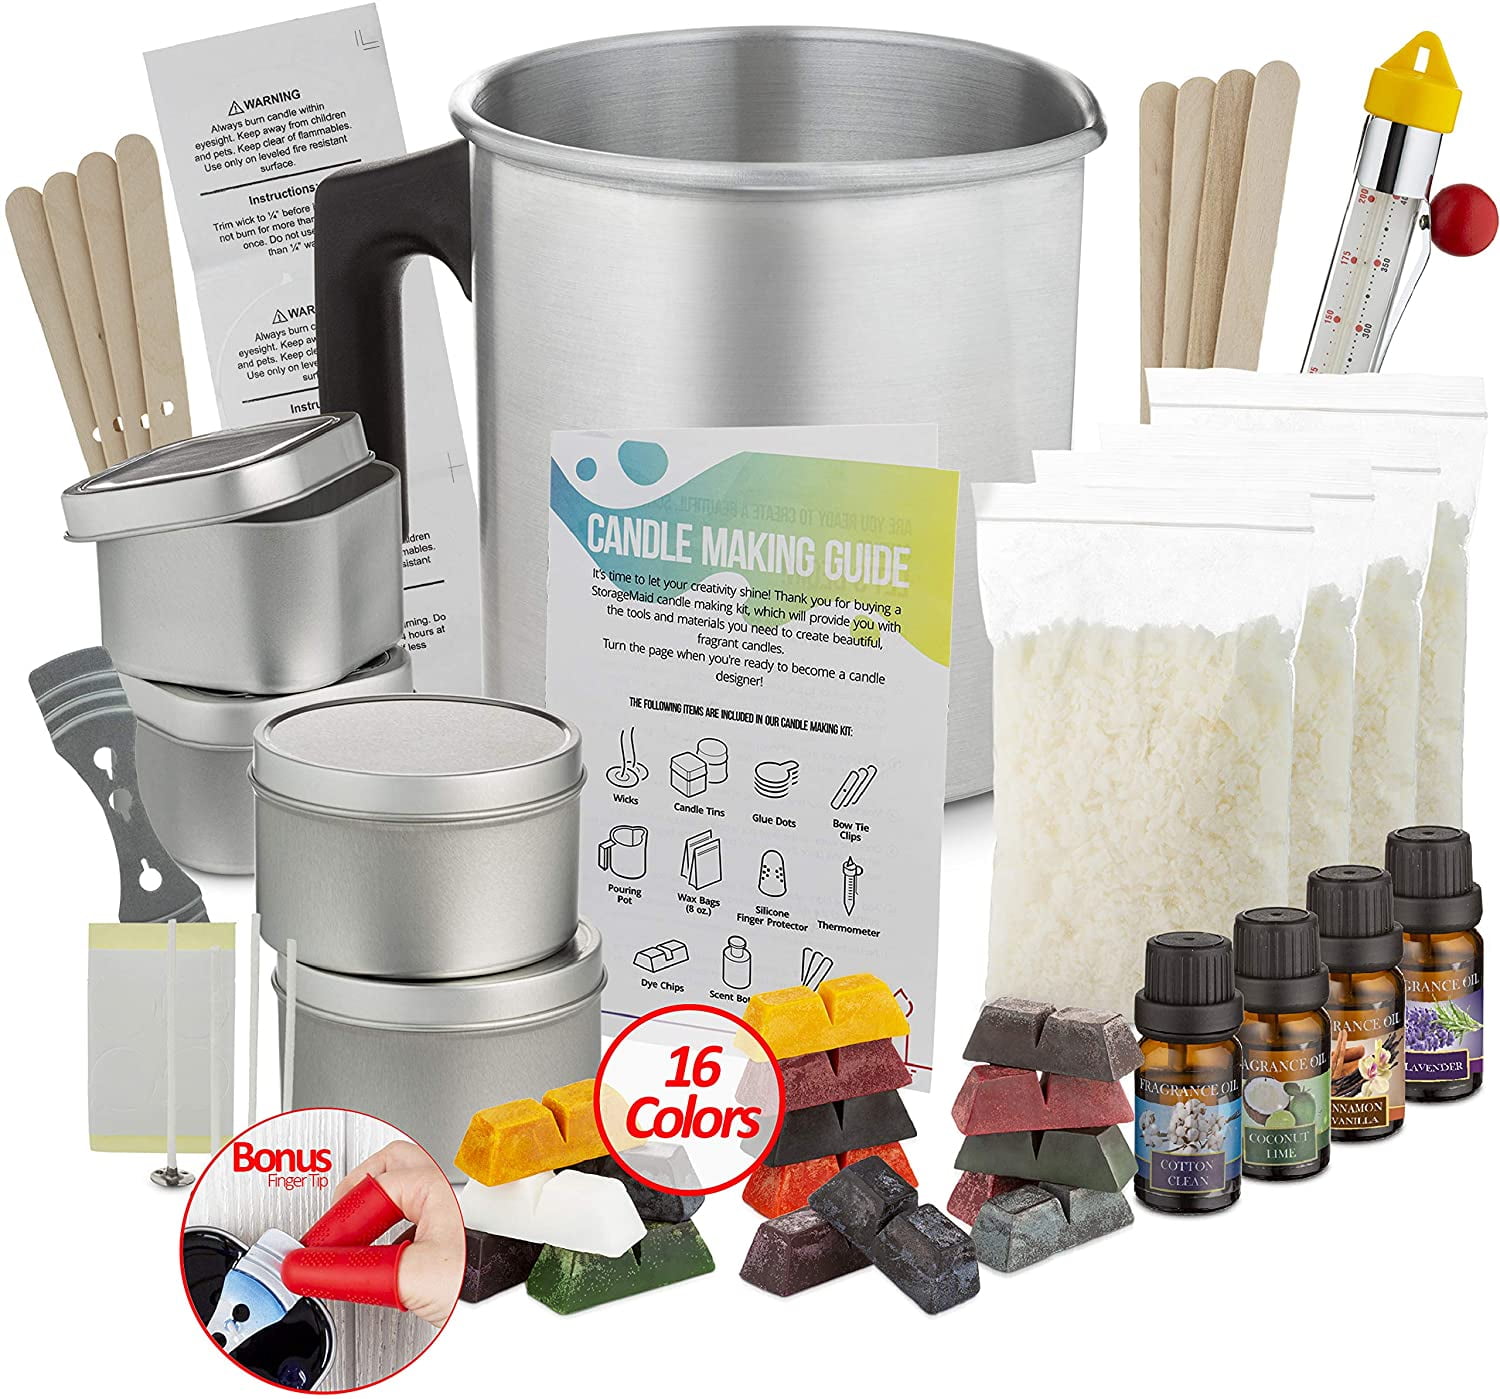 Candle Making Kits for sale in Woodbridge, Virginia